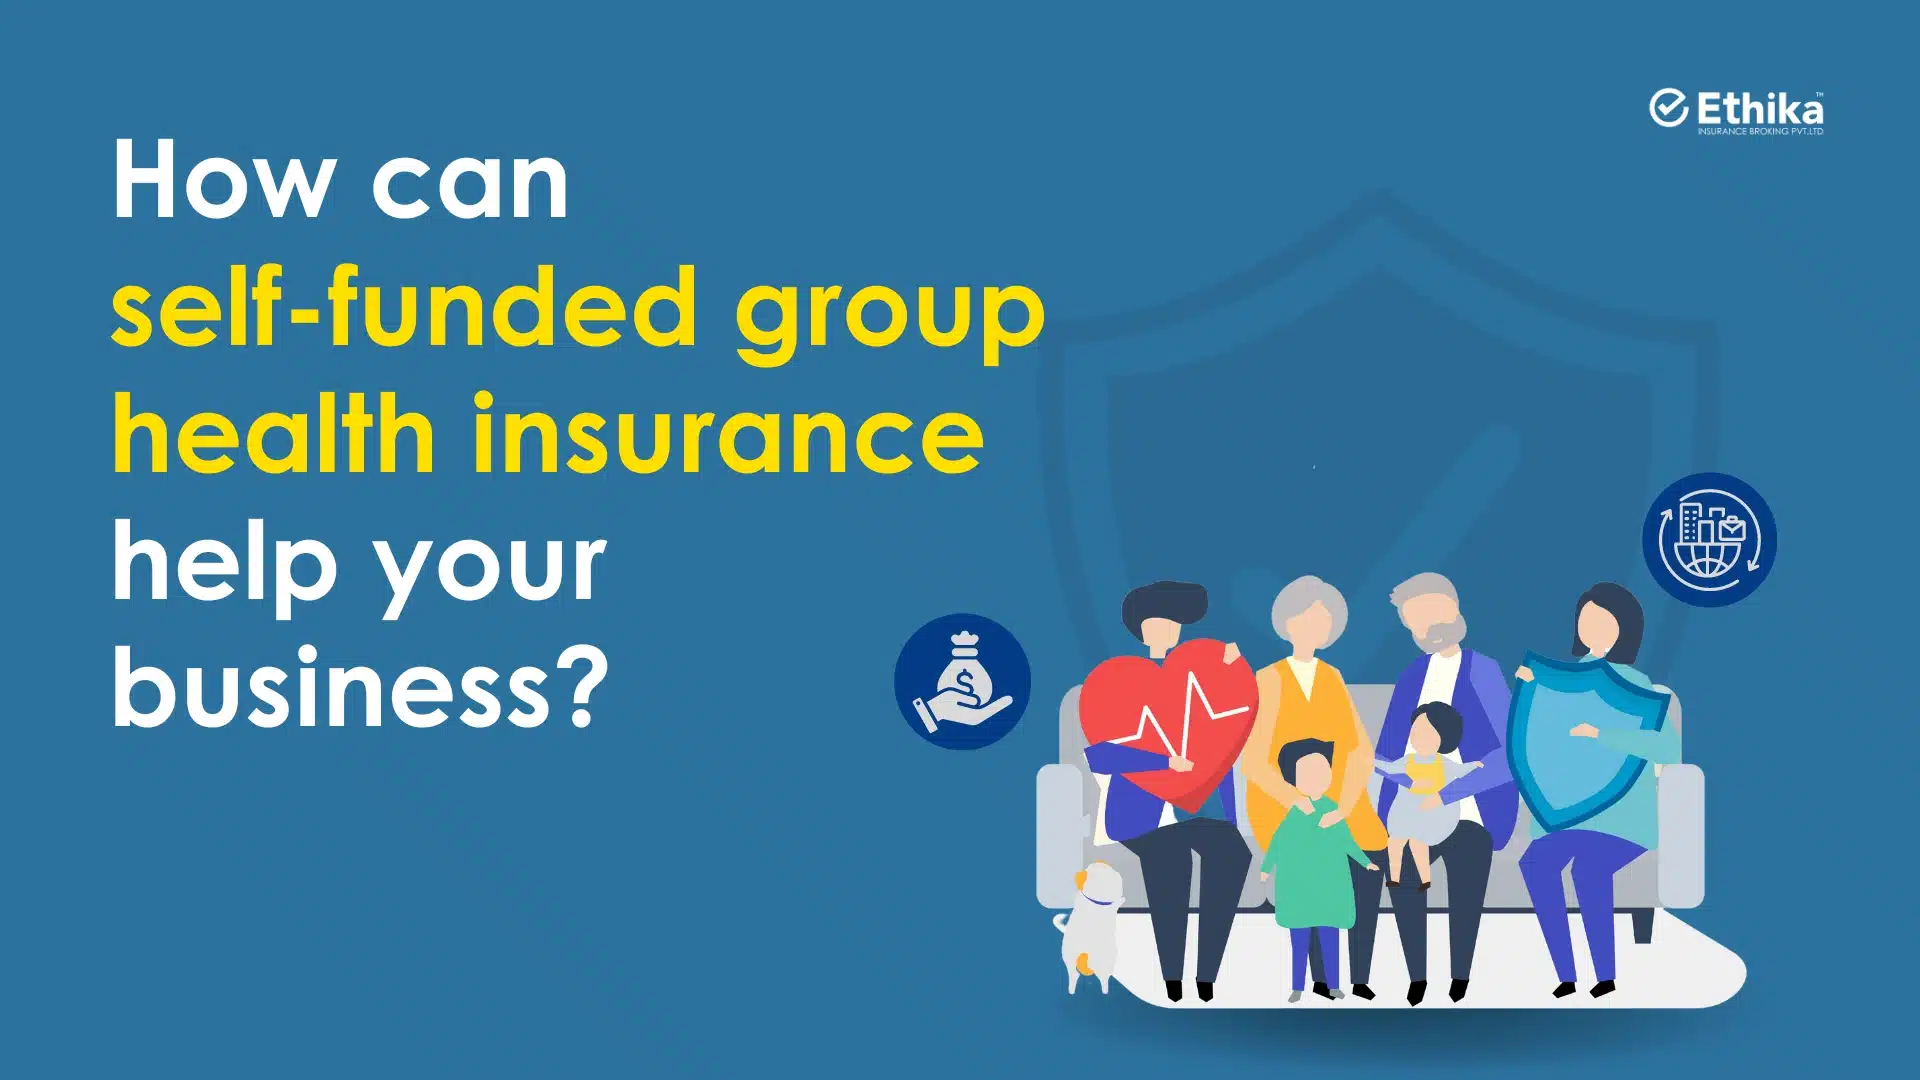 How can self-funded group health insurance help your business?